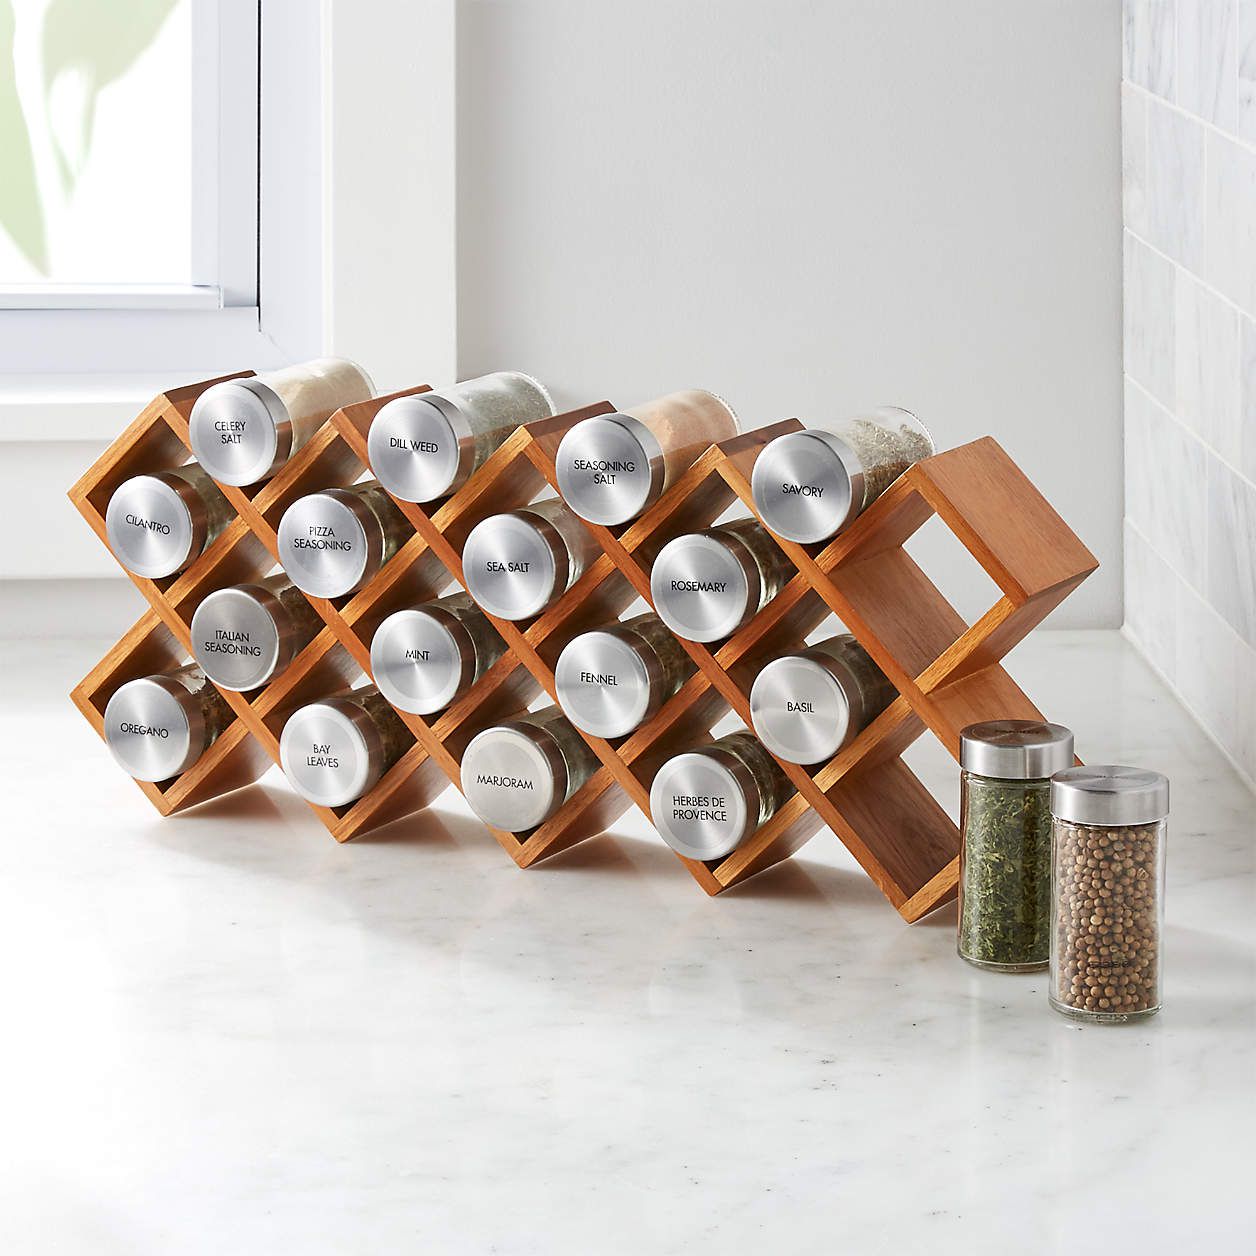 $3 each Holiday Spice Rack 8 packs  Better Homes Gardens Wax Cubes 